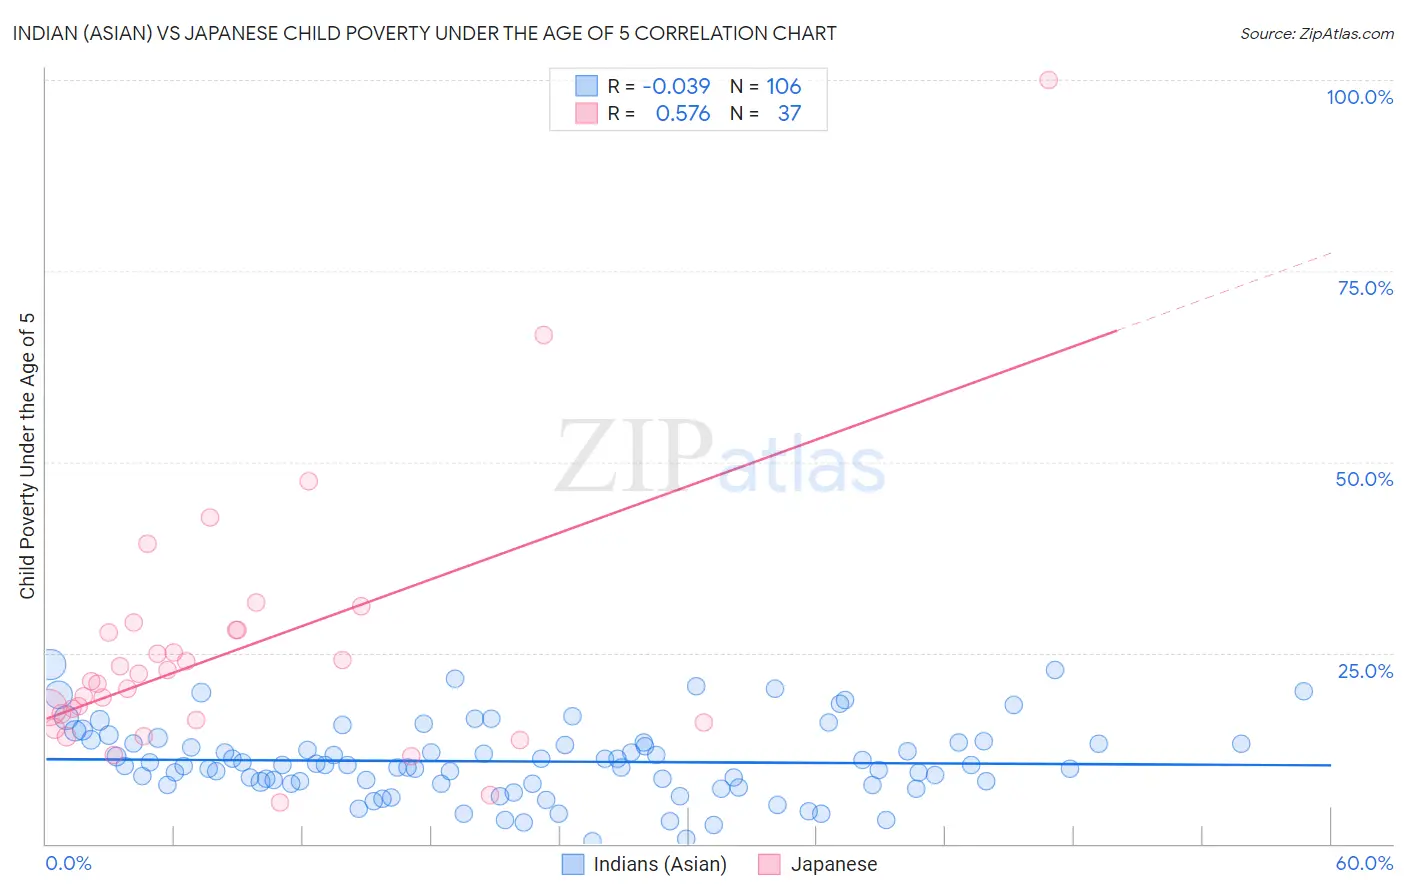 Indian (Asian) vs Japanese Child Poverty Under the Age of 5